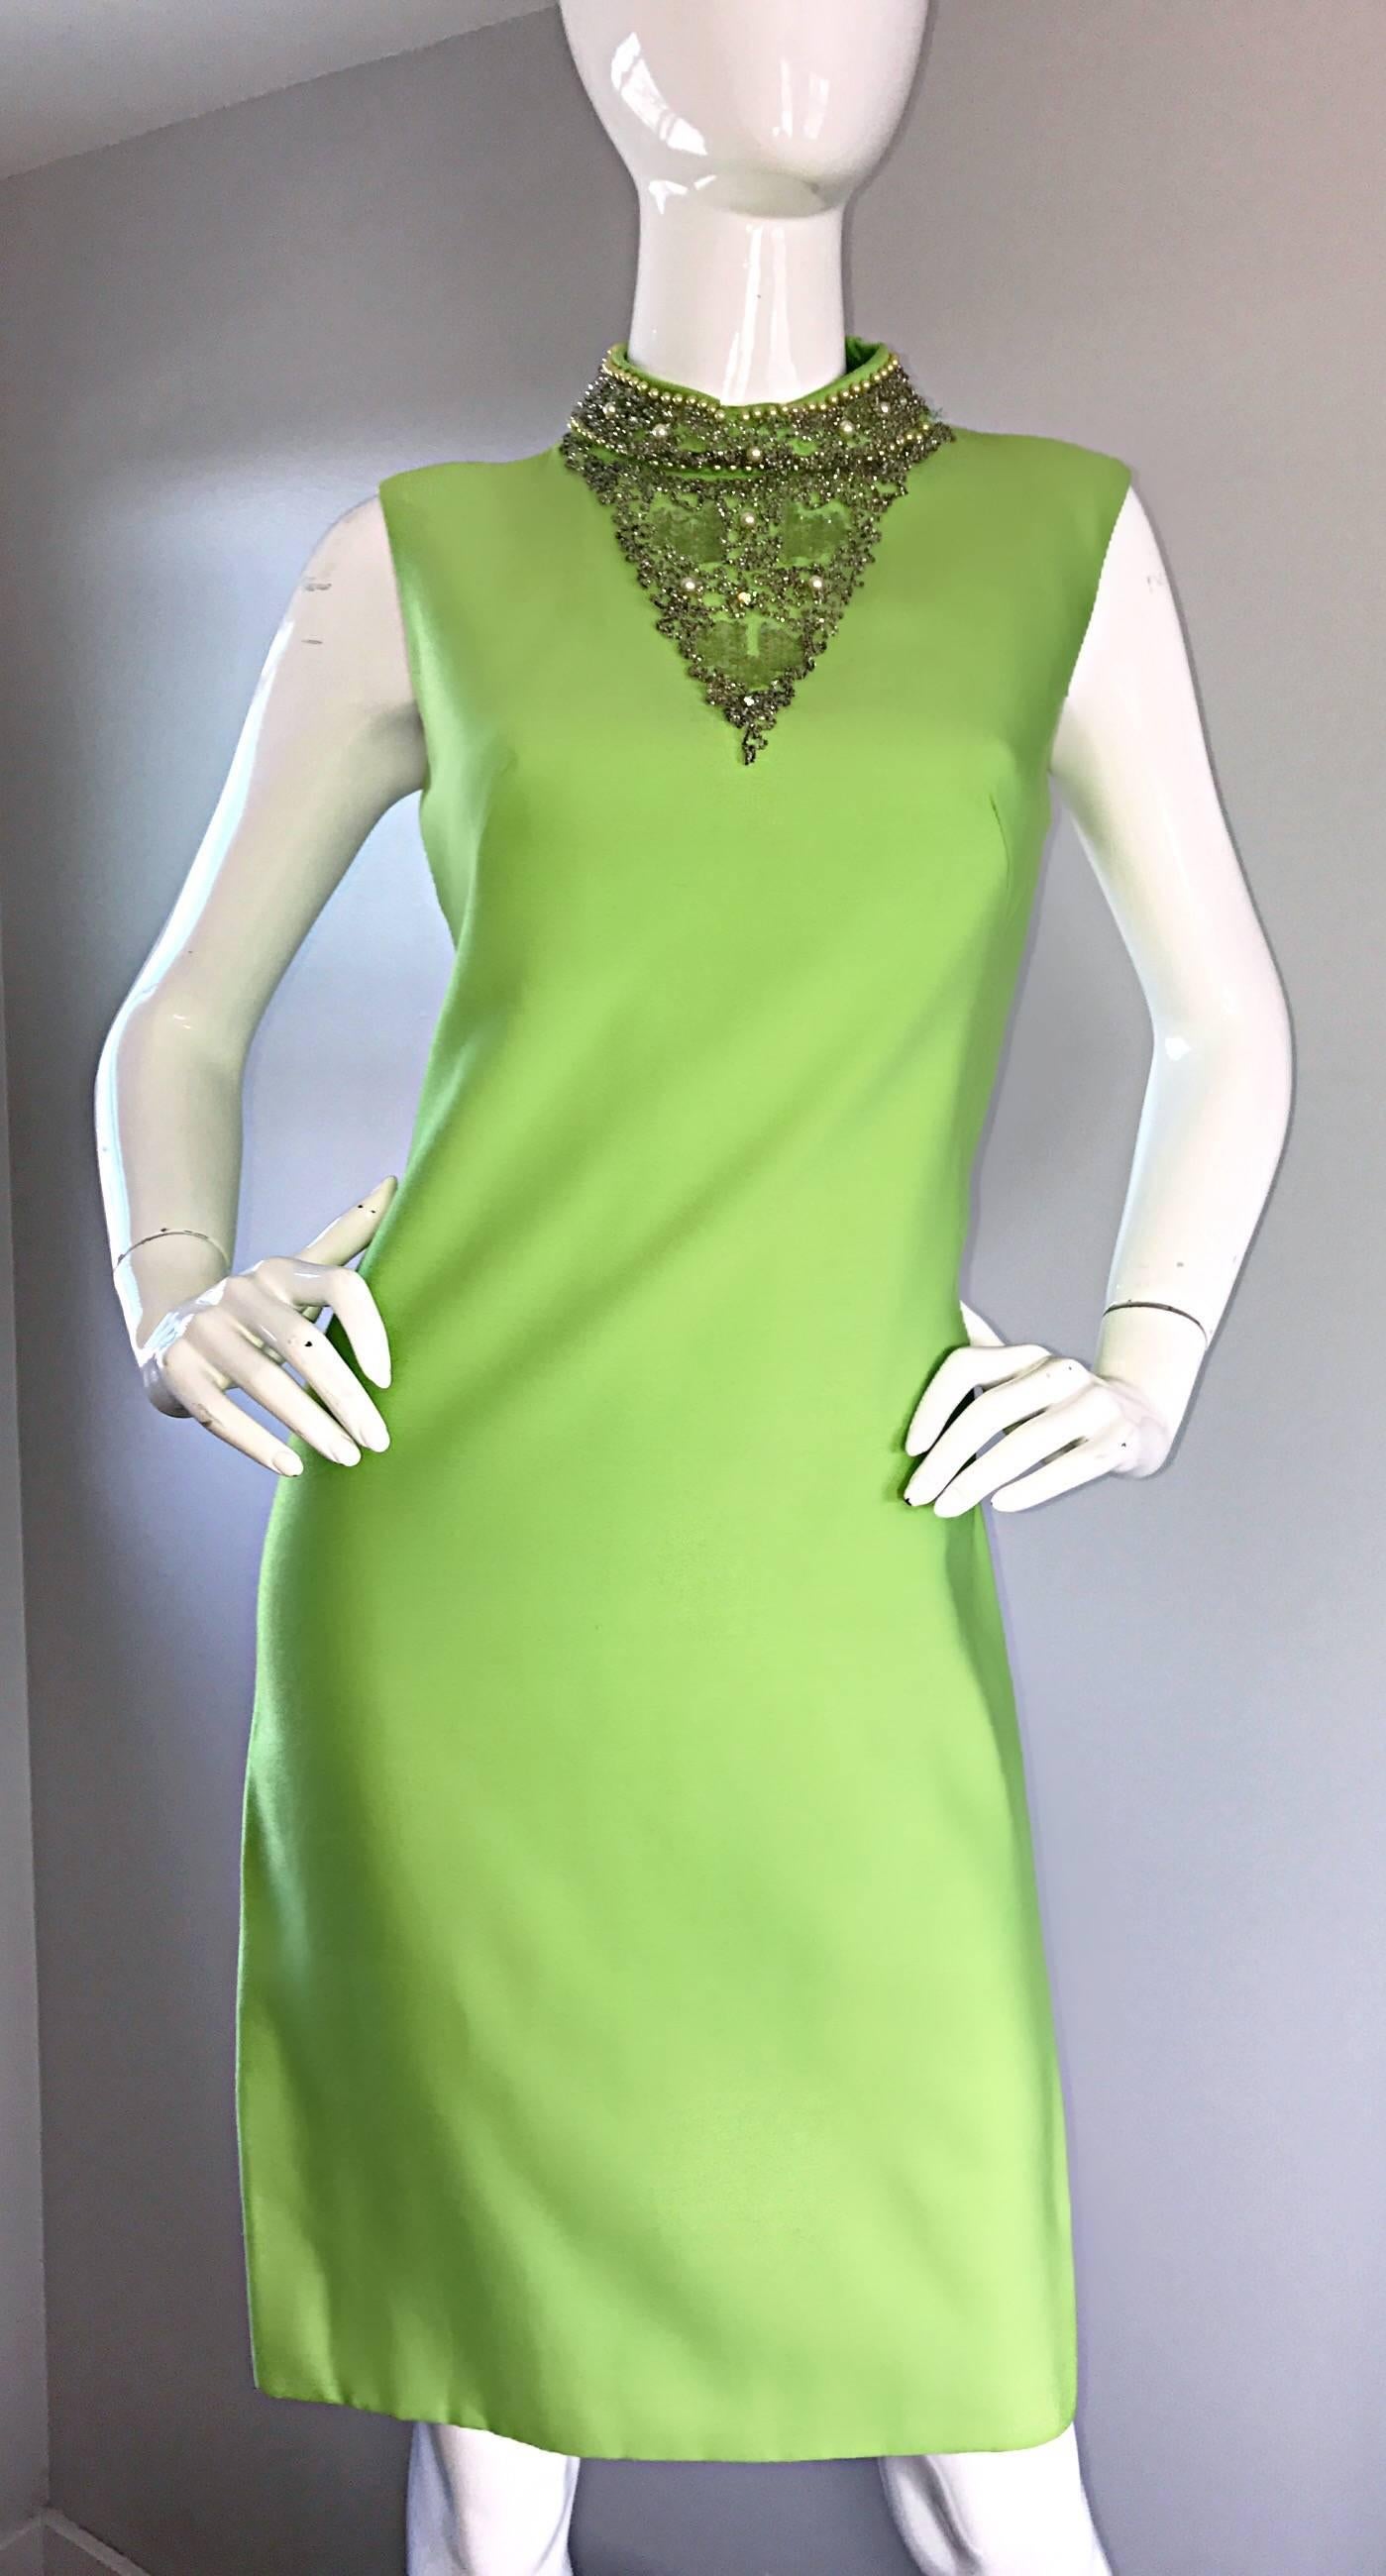 1960s Lime Green Vintage Beaded + Sequined 60s Bright Mod Shift Dress w/ Pearls For Sale 1